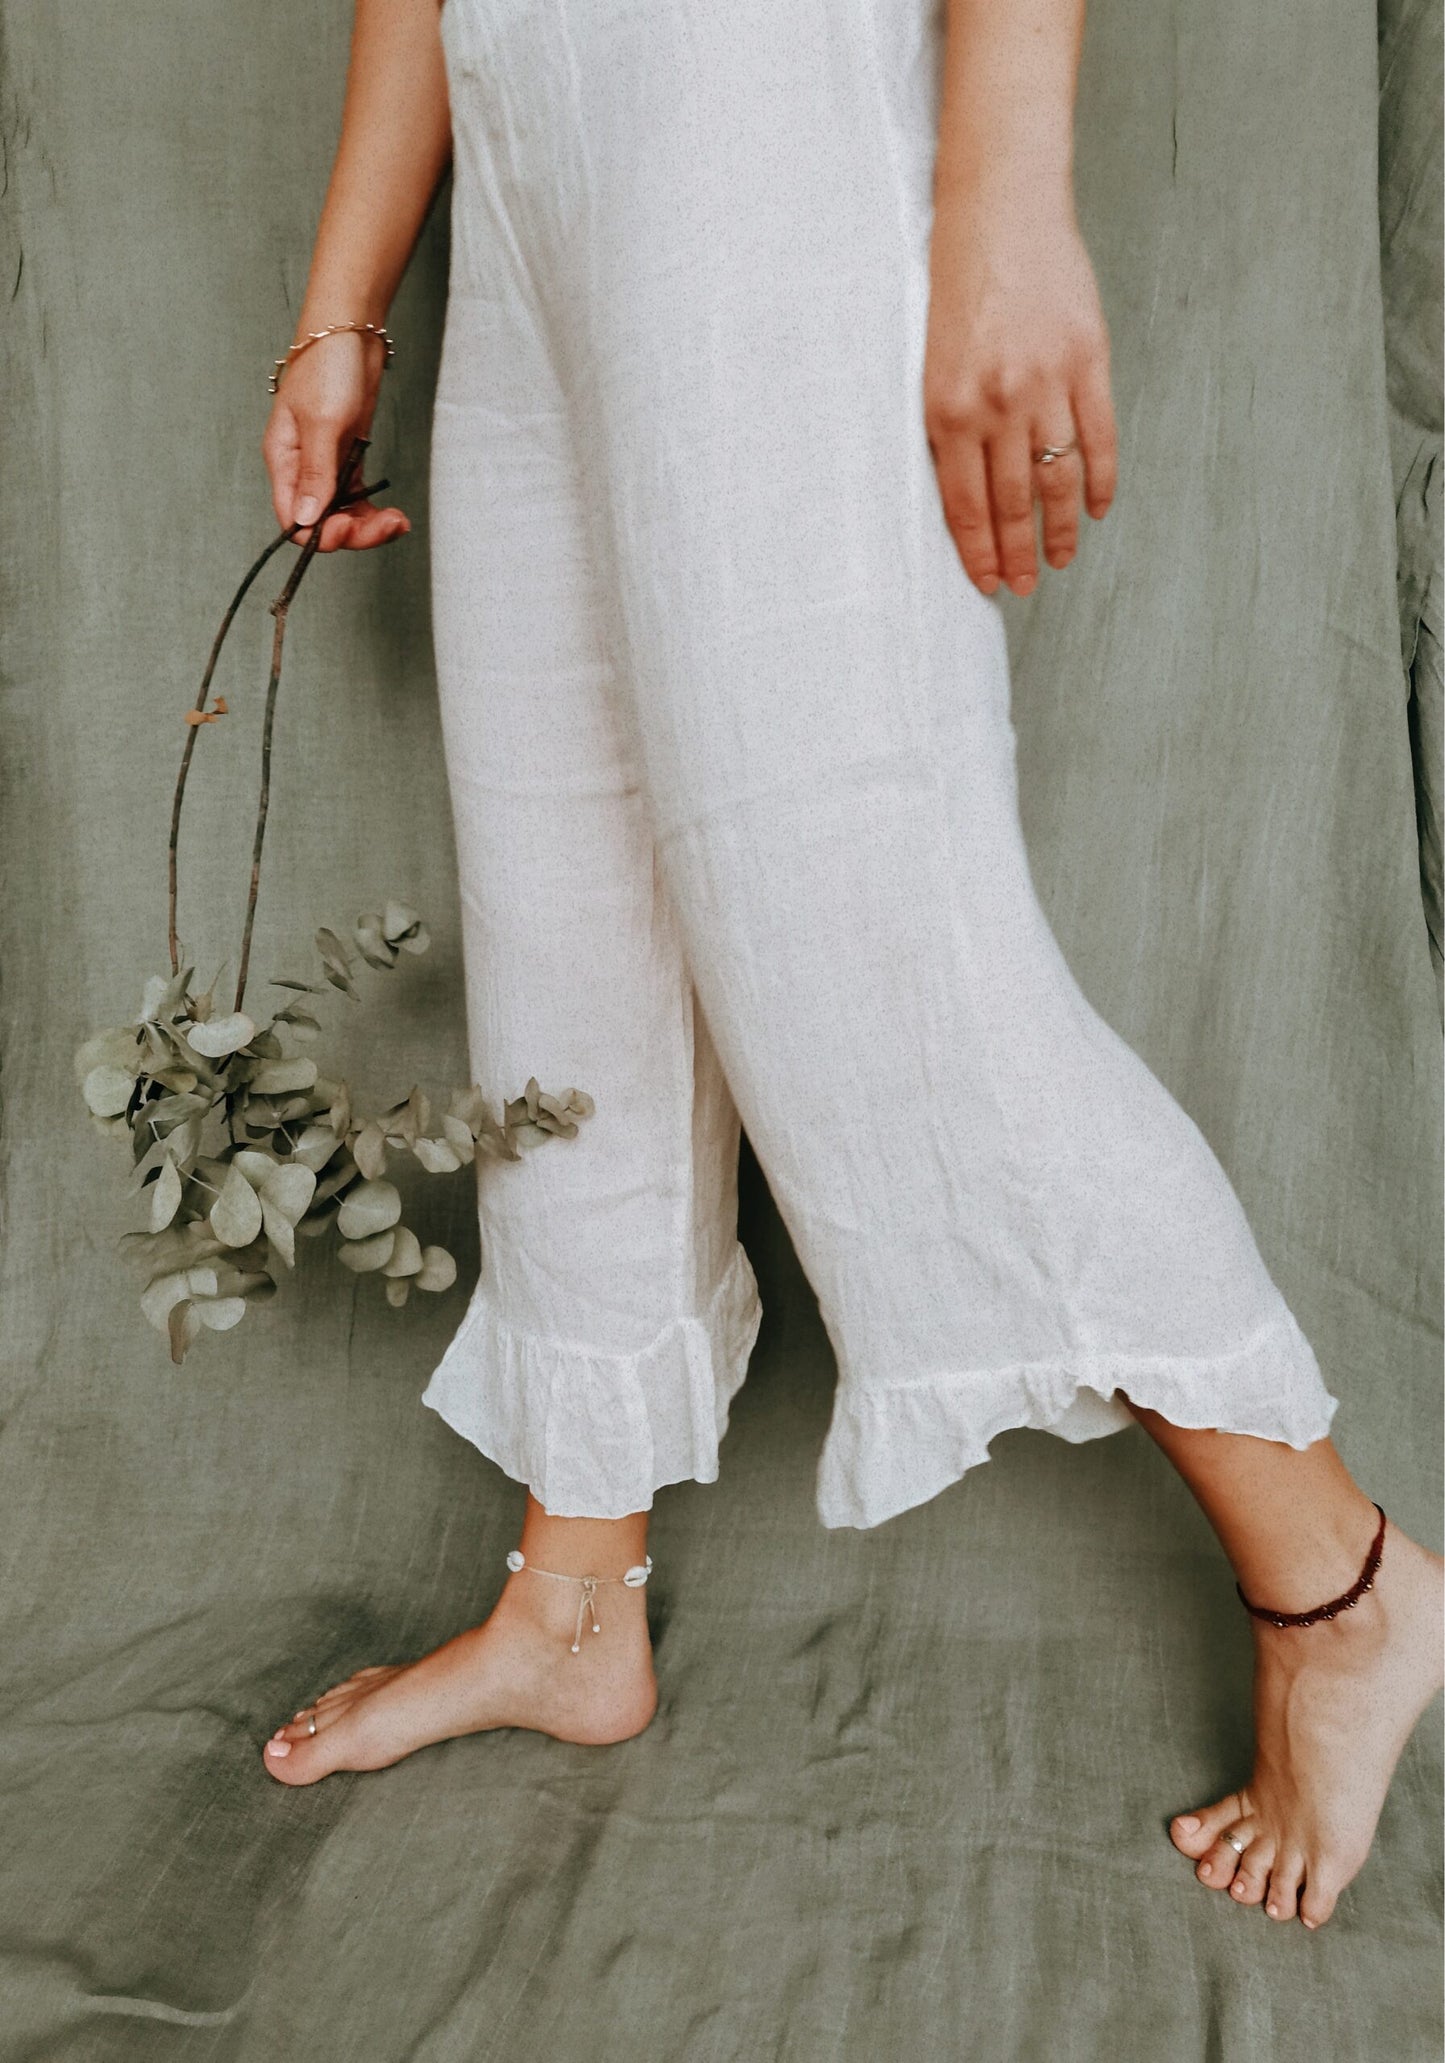 Standing elegantly, a woman wears light extra comfortable white linen long pants, as she stands in front of a sage green background.  